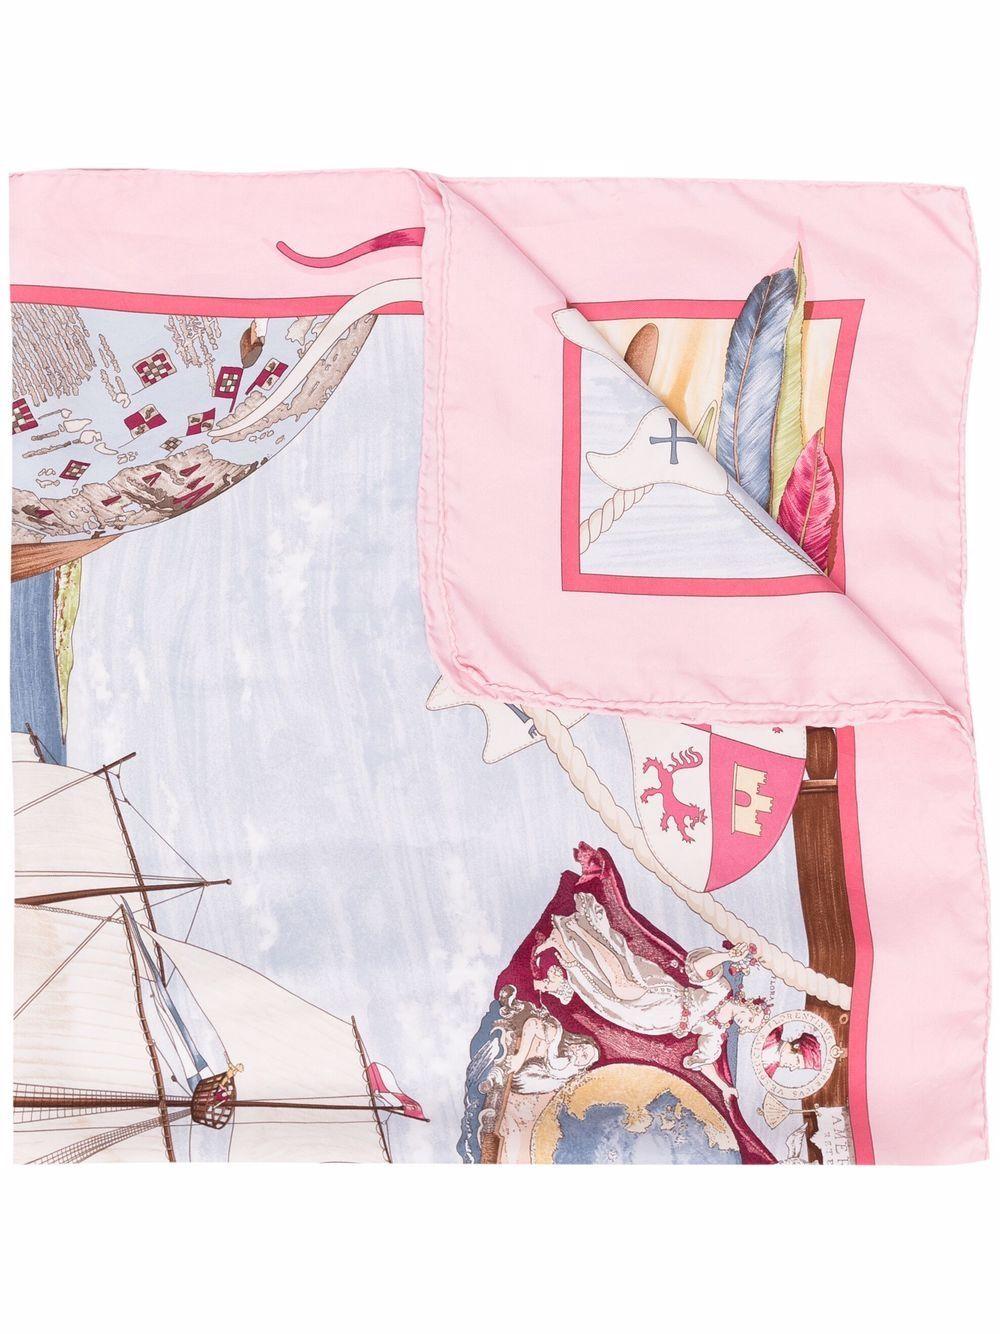 Hermes pink silk twill scarf titled 